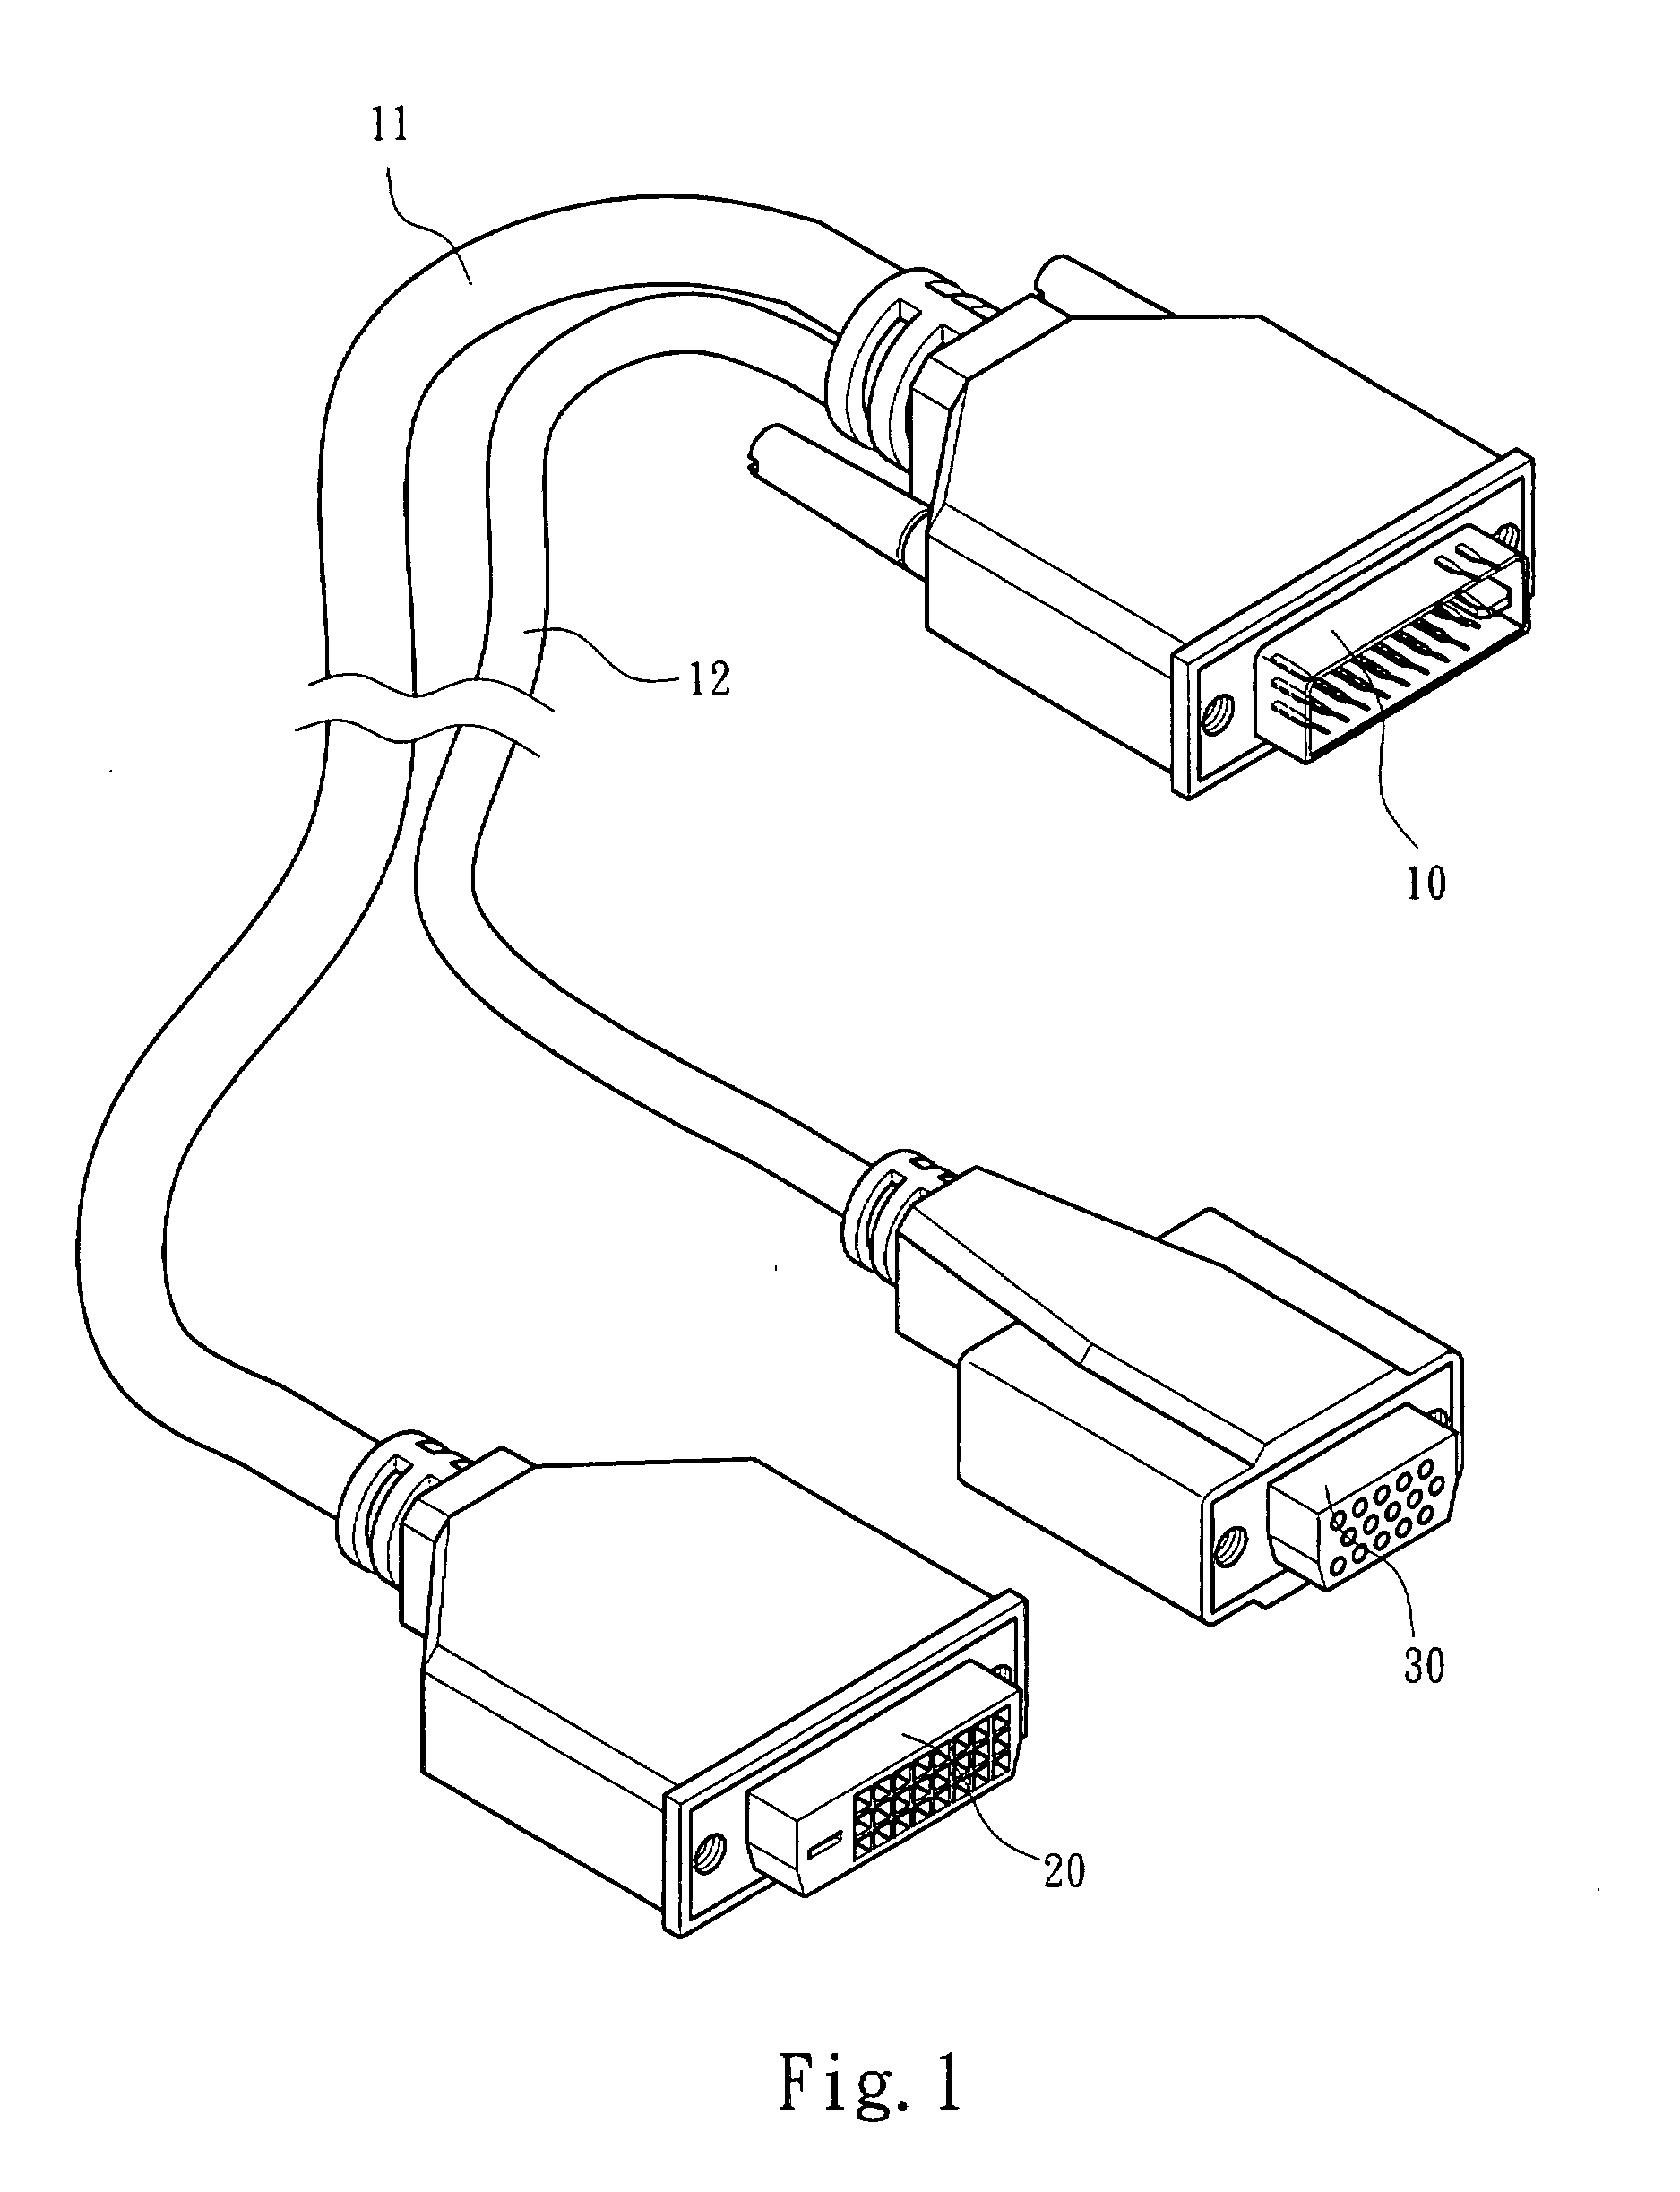 Video connection line to integrate analog and digital signals